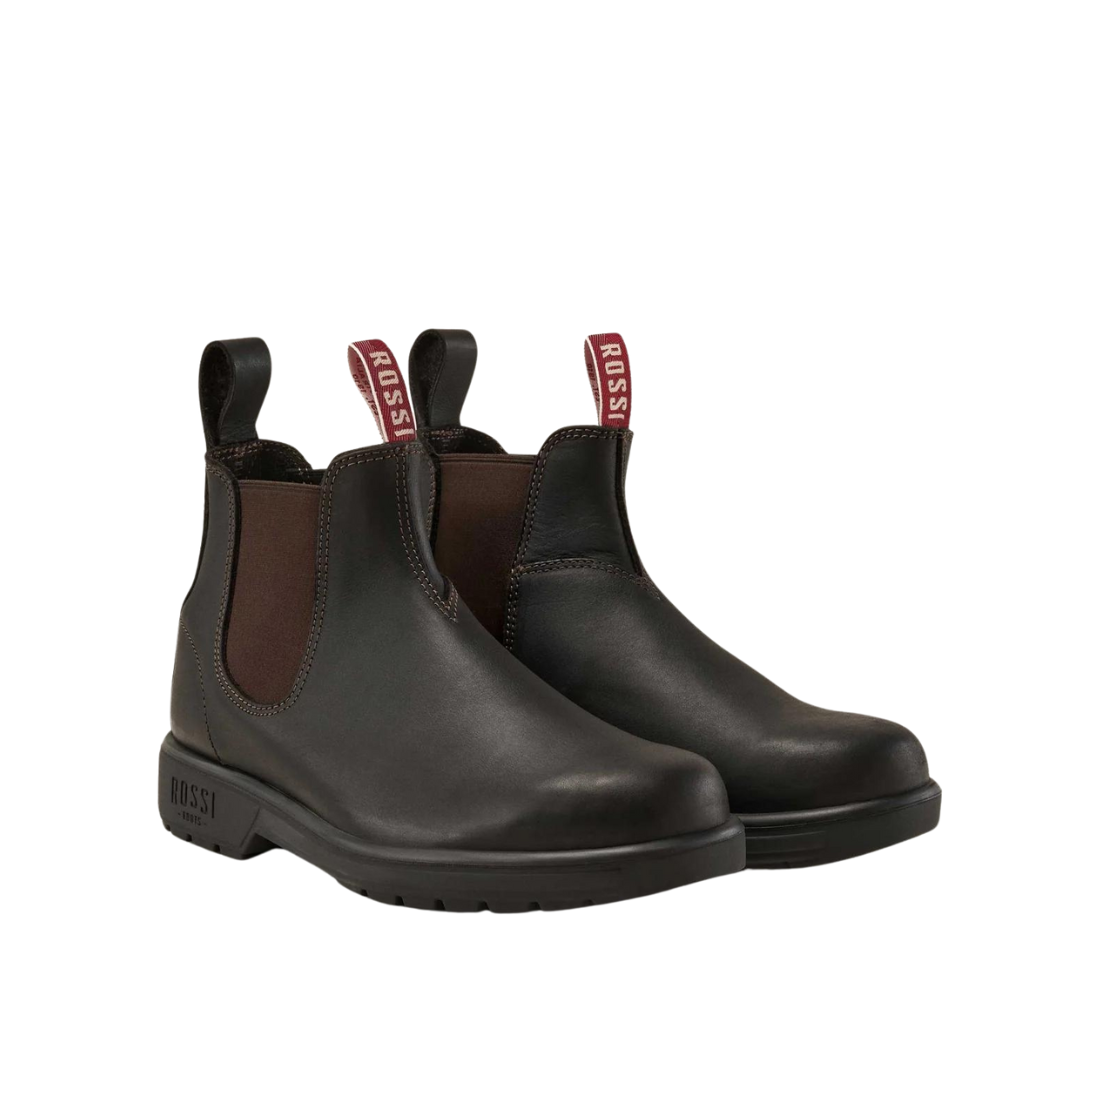 Rossi 303 Endura Pull-on Workboot Claret Workboots by Rossi | The Bloke Shop